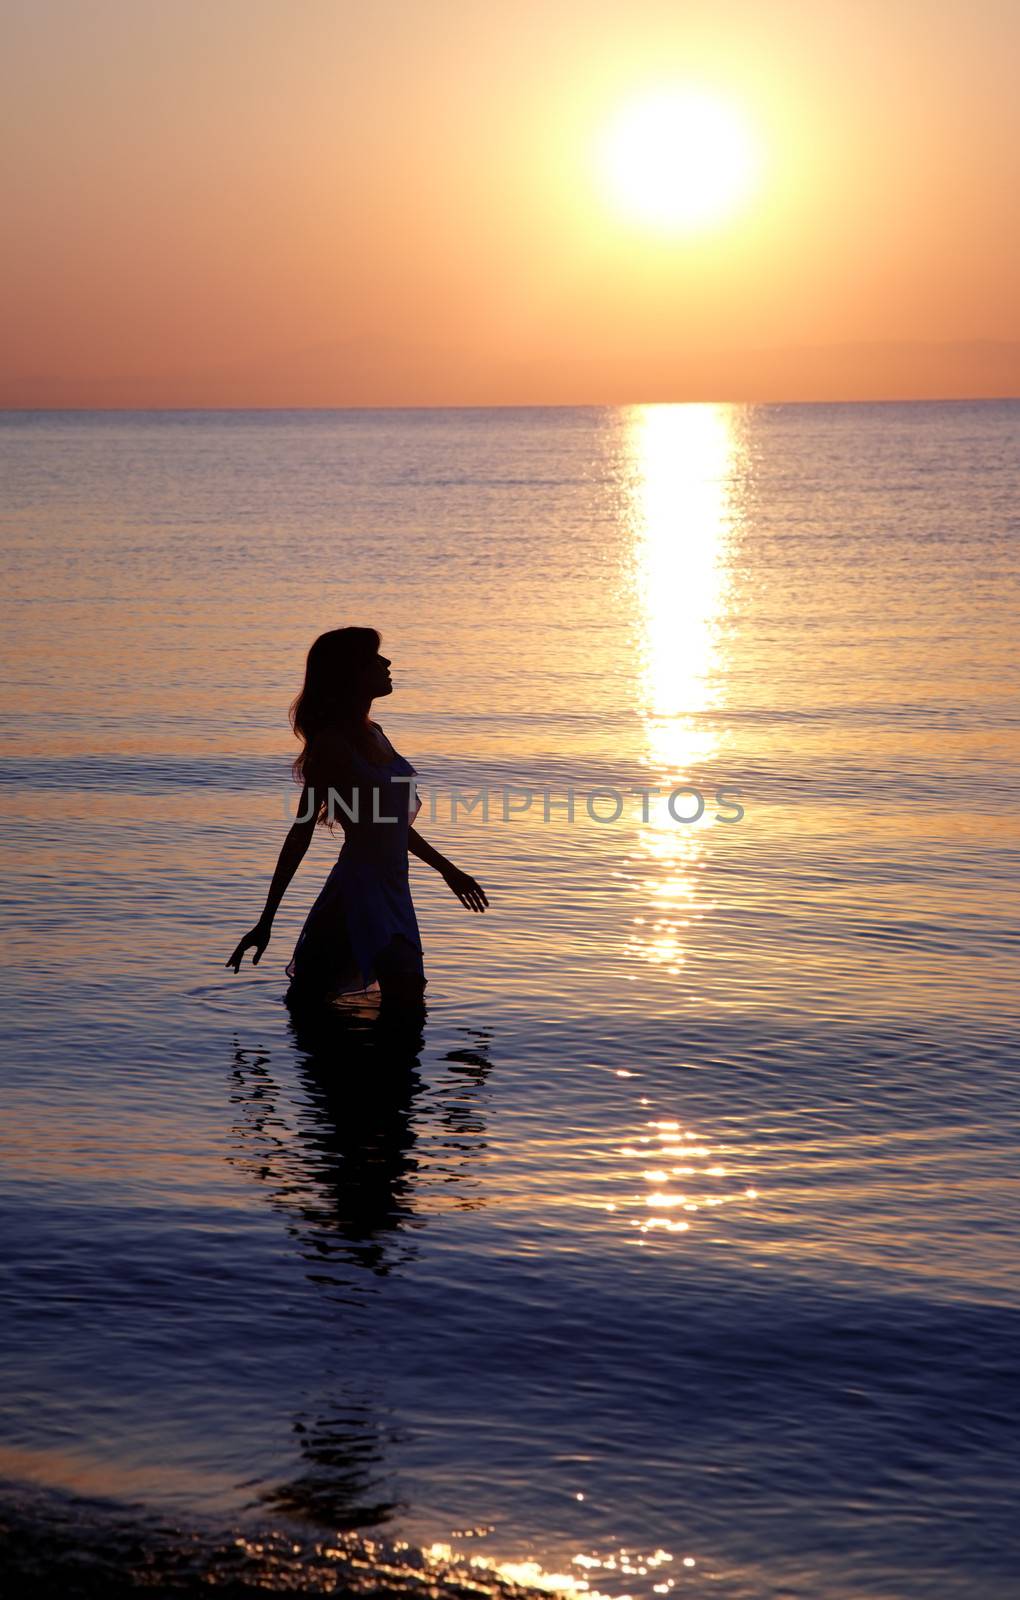 Silhouette of the woman standing in the sea water during golden sunset. Natural colors and darkness